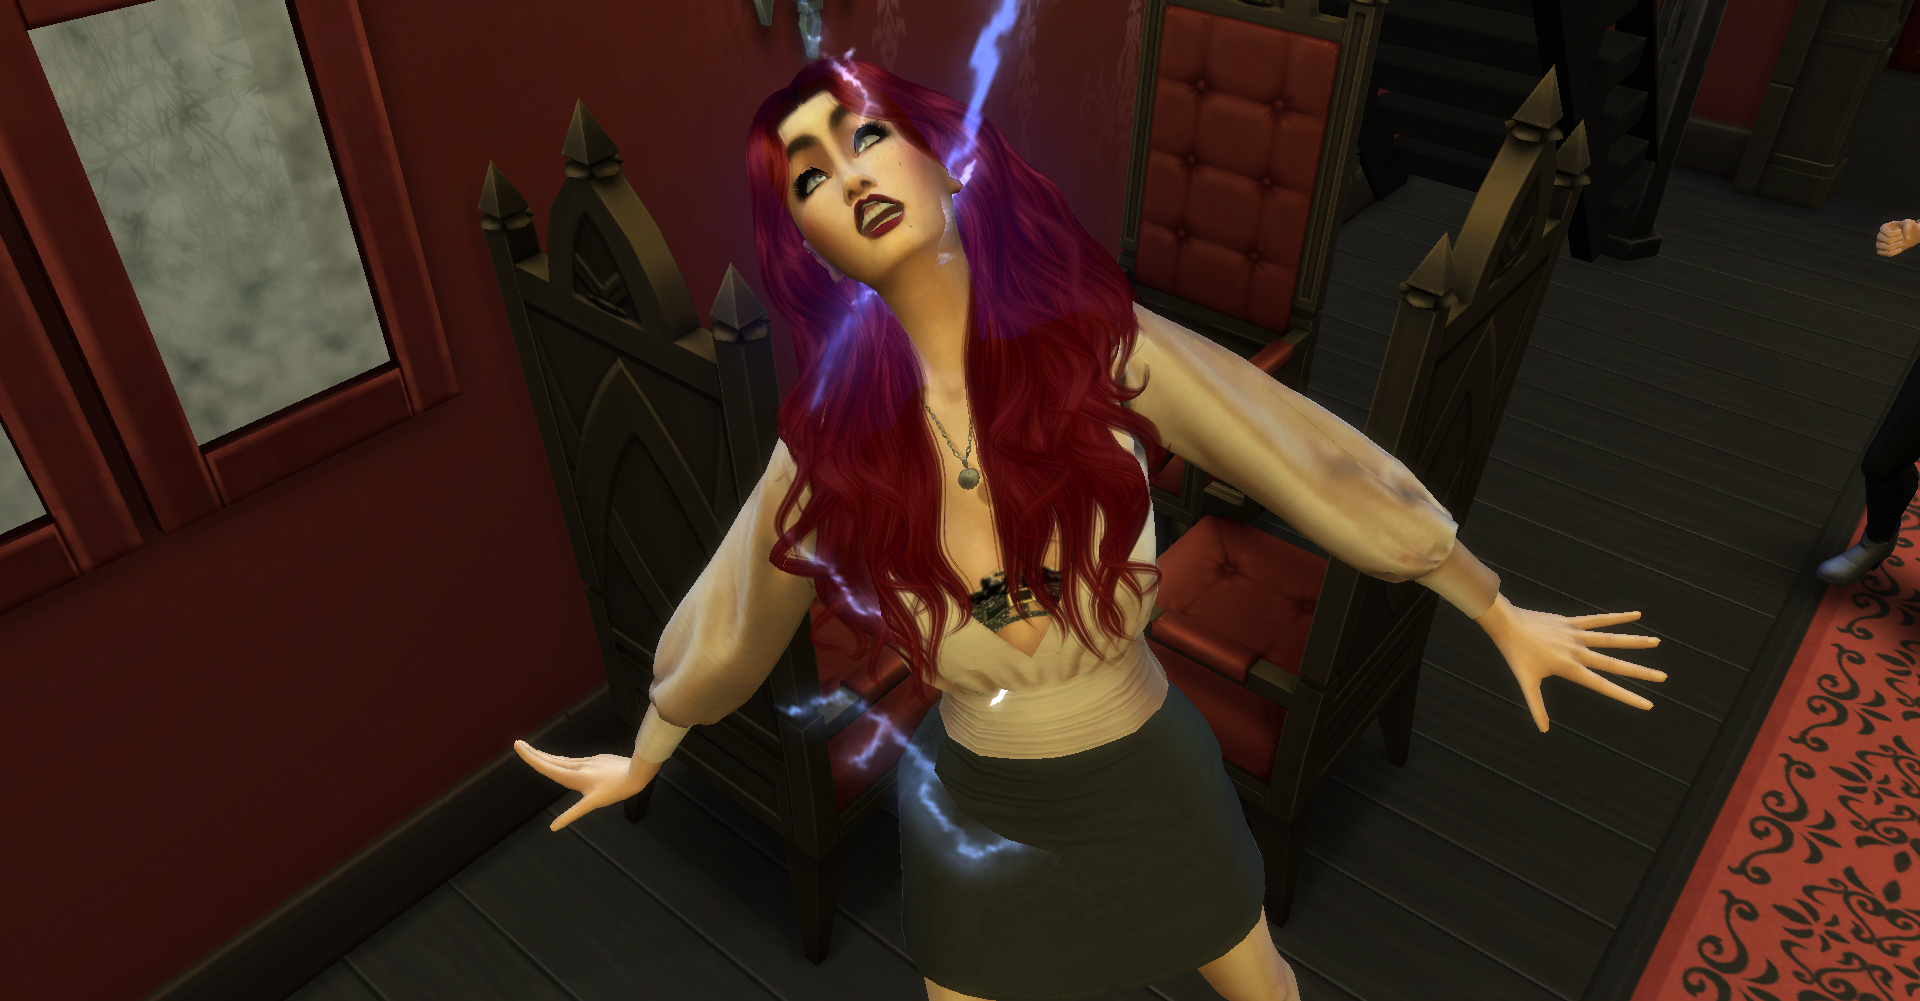 Hot Complications Sims Story Page 8 The Sims 4 General Discussion 3493